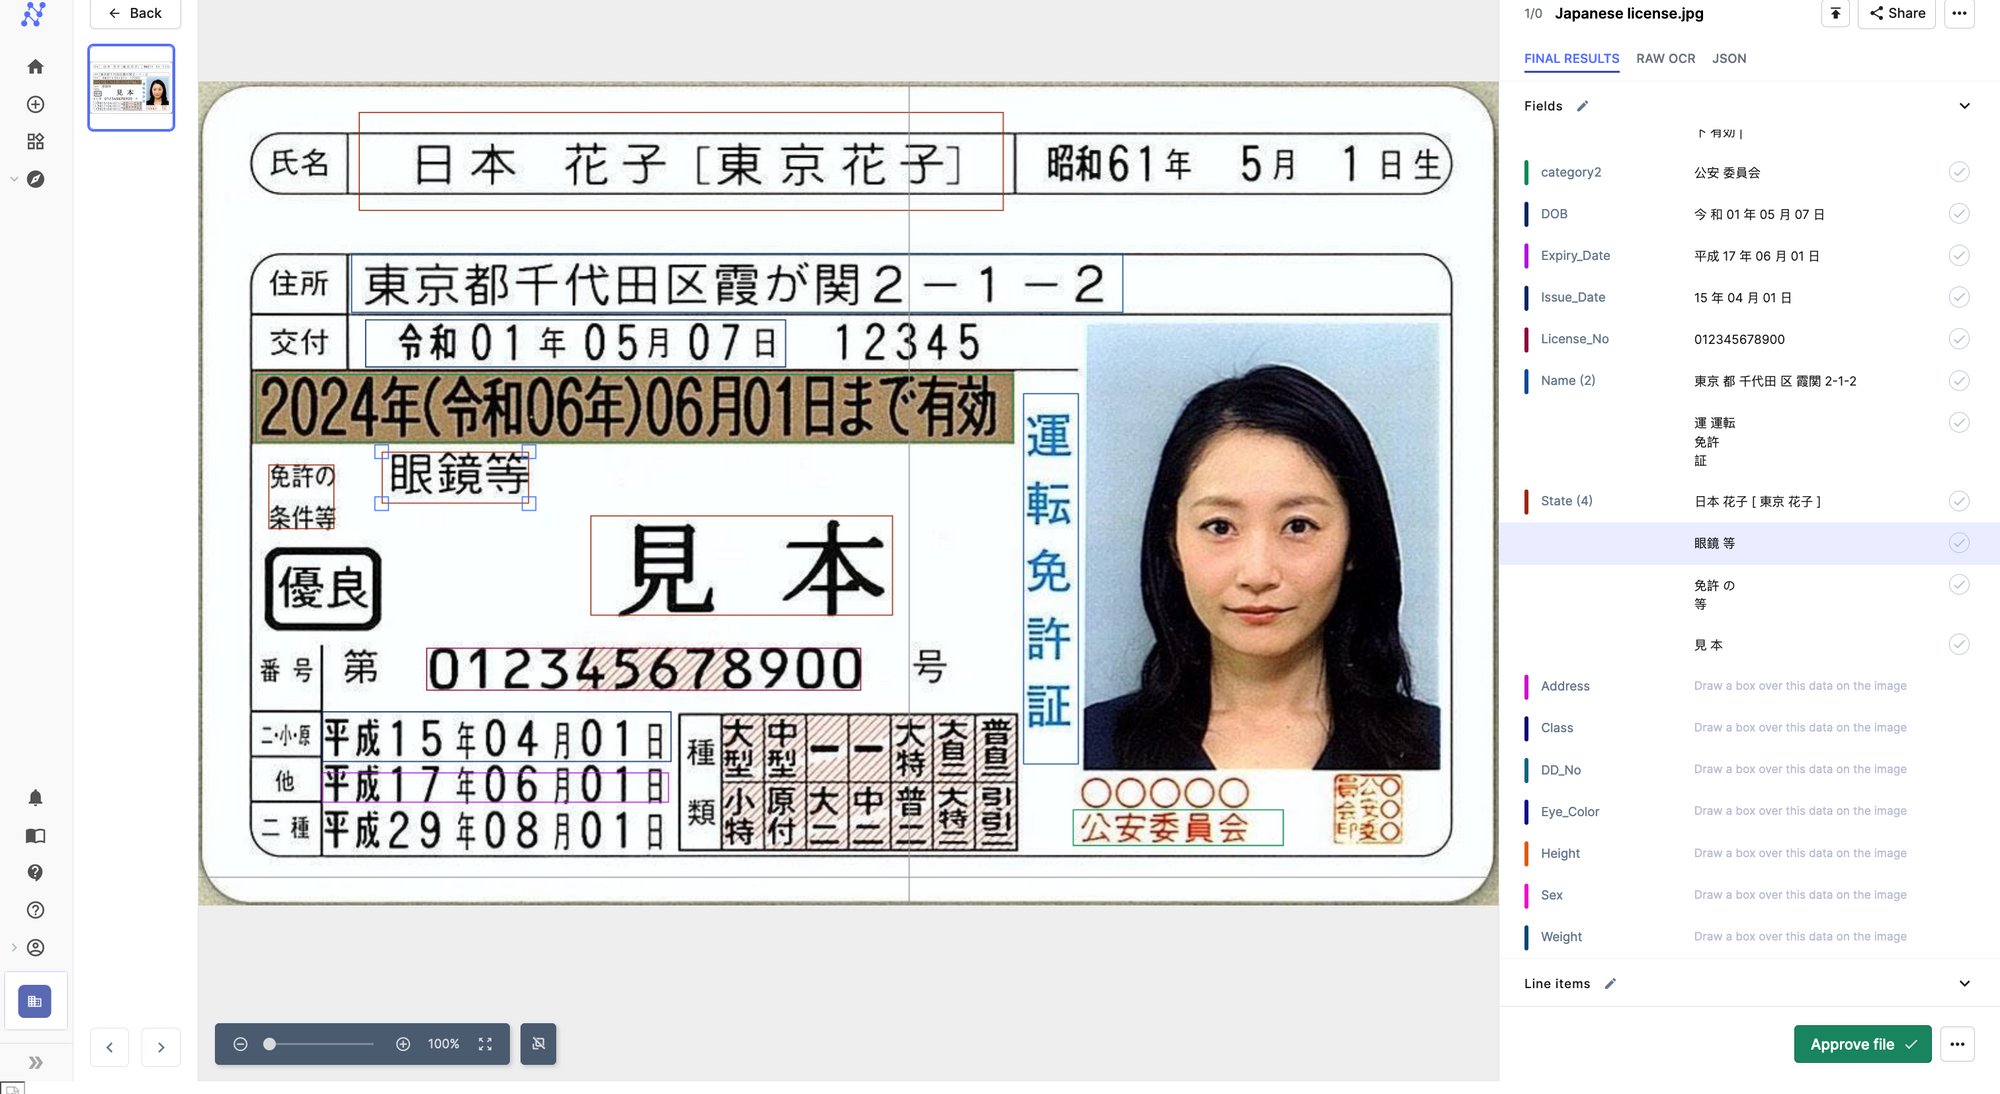 Extracting data from a sample Japanese Driver's license